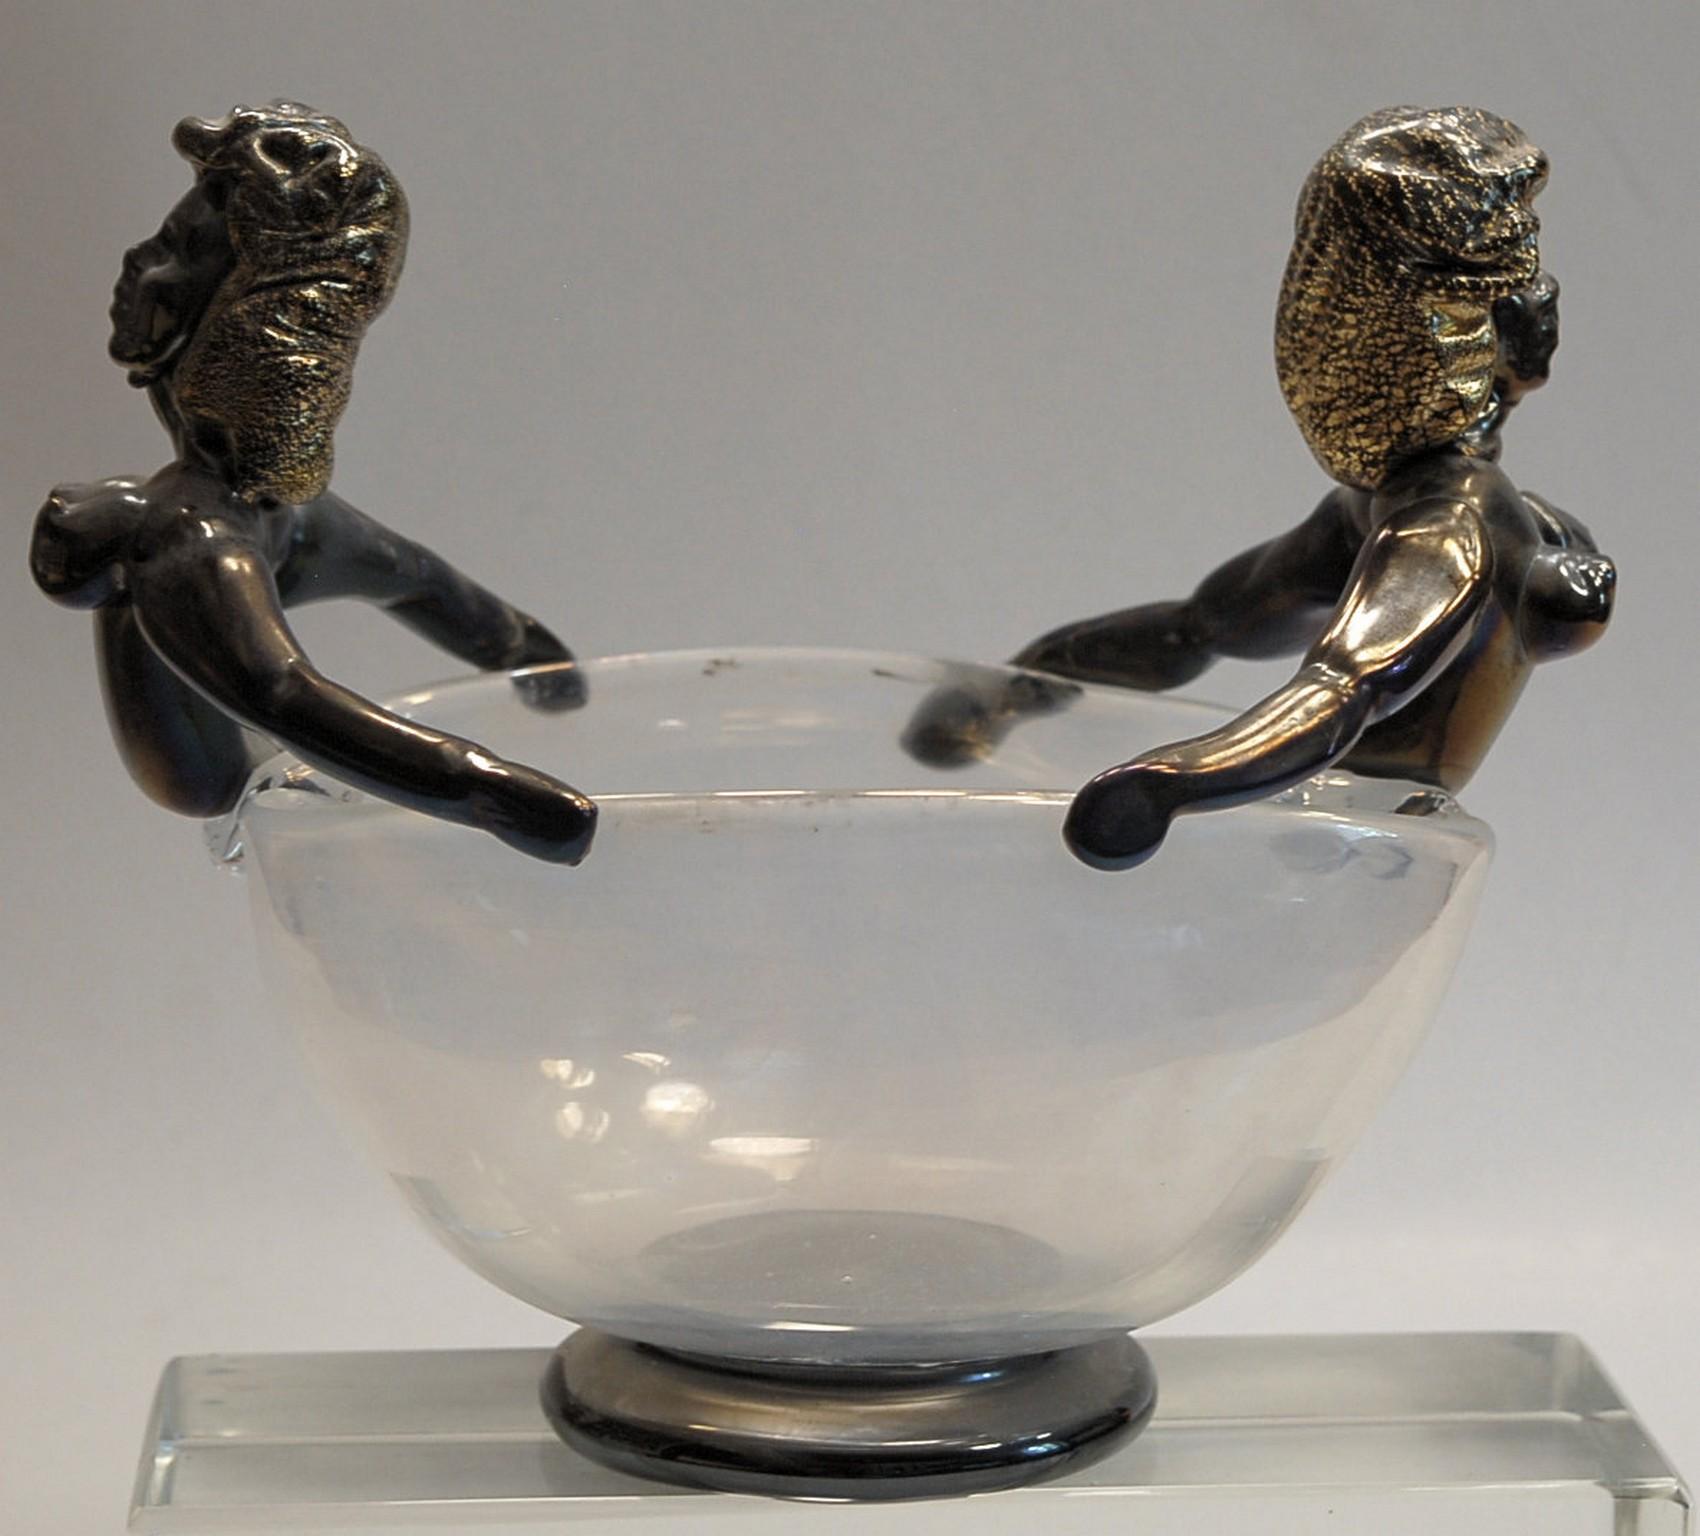 Iridescent Bowl with figurine in Figurehead Position, Ercole Barovier, 1930 For Sale 5